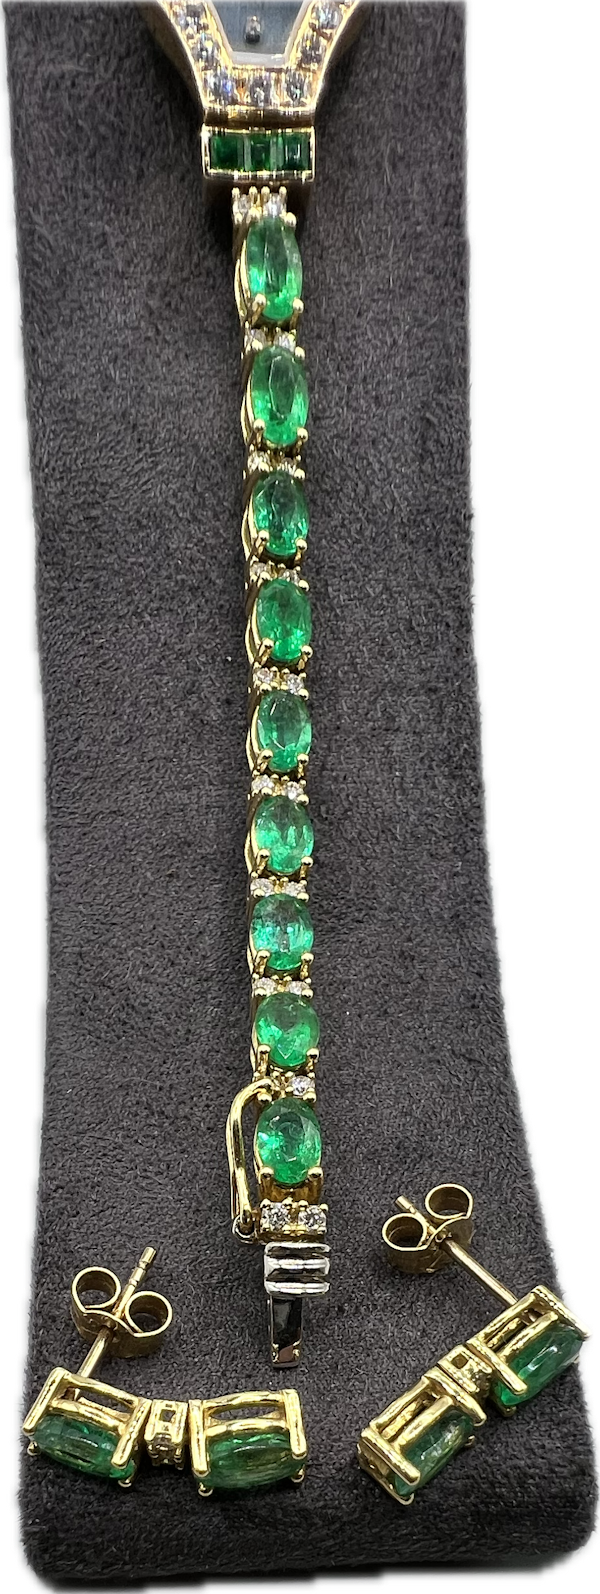 Corum Emerald 18k Gold Wristwatch and Earring Set Mid 20th Century - image 2